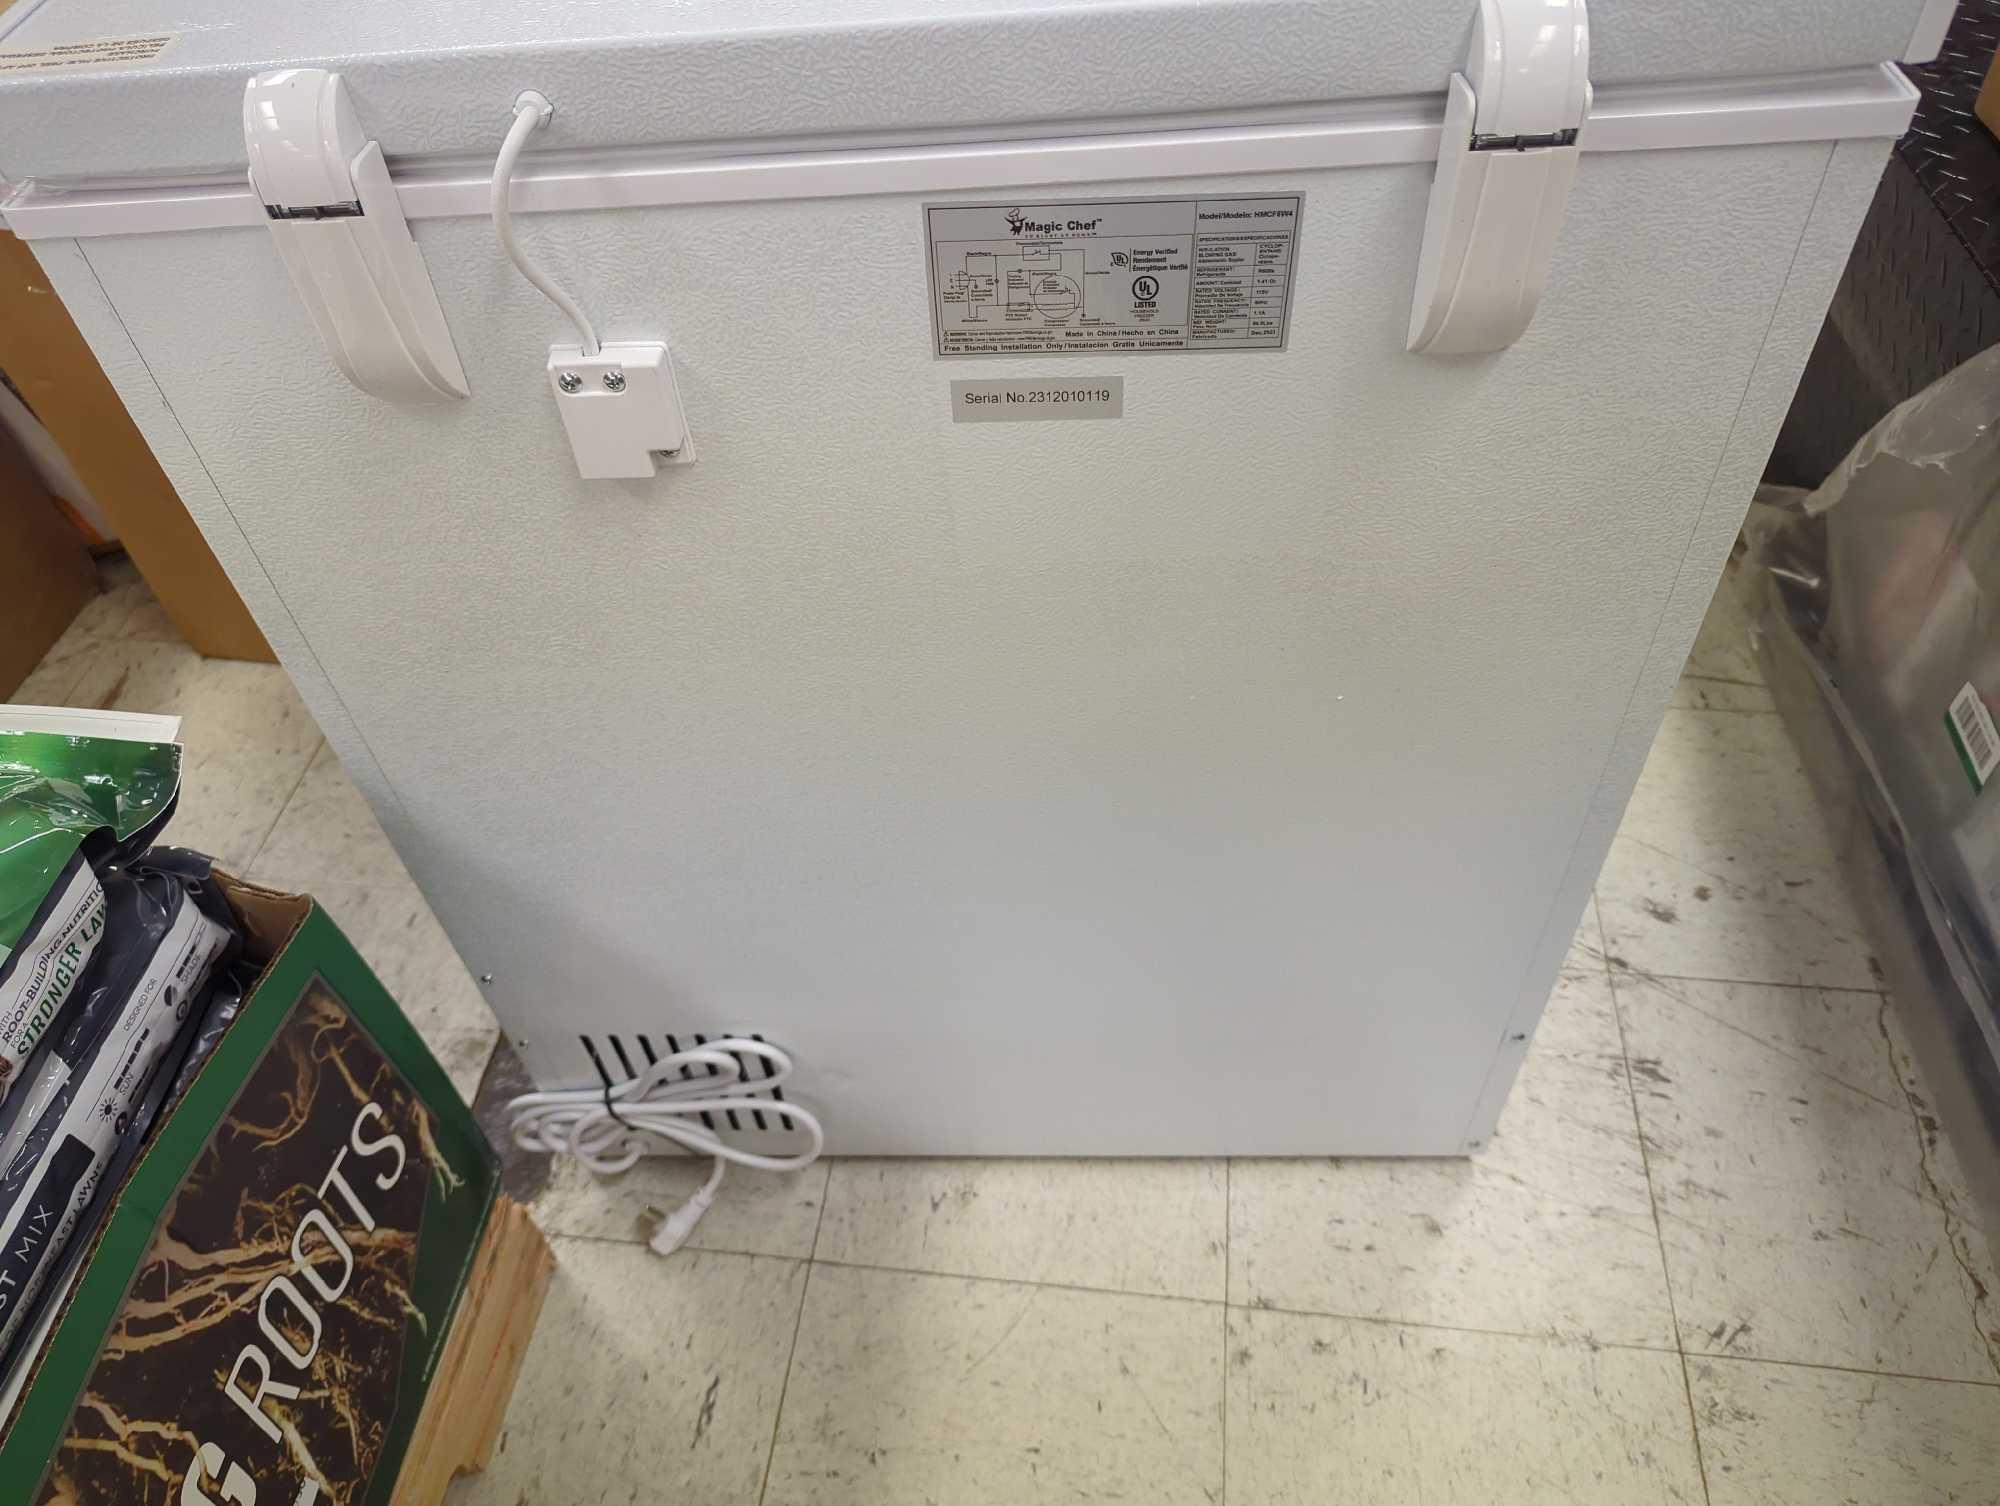 (Has Some Denting) Magic Chef 5.0 cu. ft. Chest Freezer in White, Appears to be New Has Some